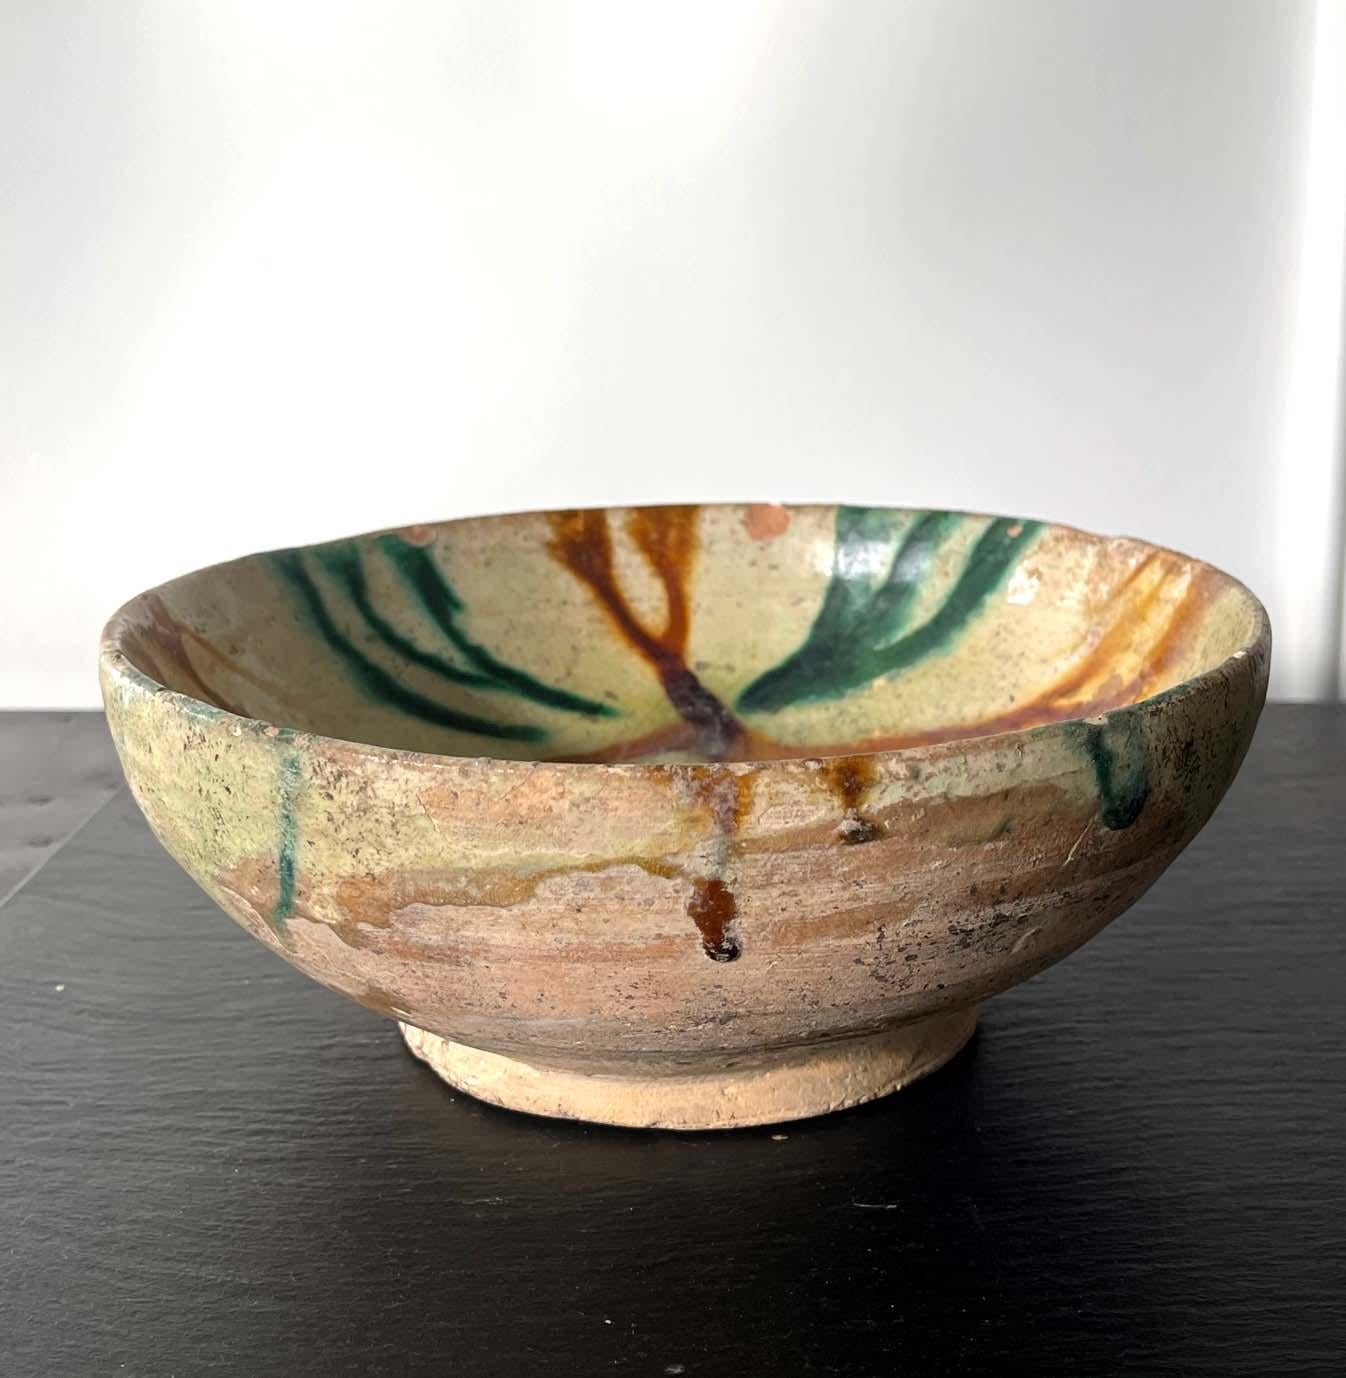 An Islamic ceramic bowl from Samanid Dynasty Persia circa 10th century, possibly from Nishapur. The earth ware body of the bowl was made of a red clay, which was covered with an overall cream white glaze. On top of the glaze, amber yellow, and green